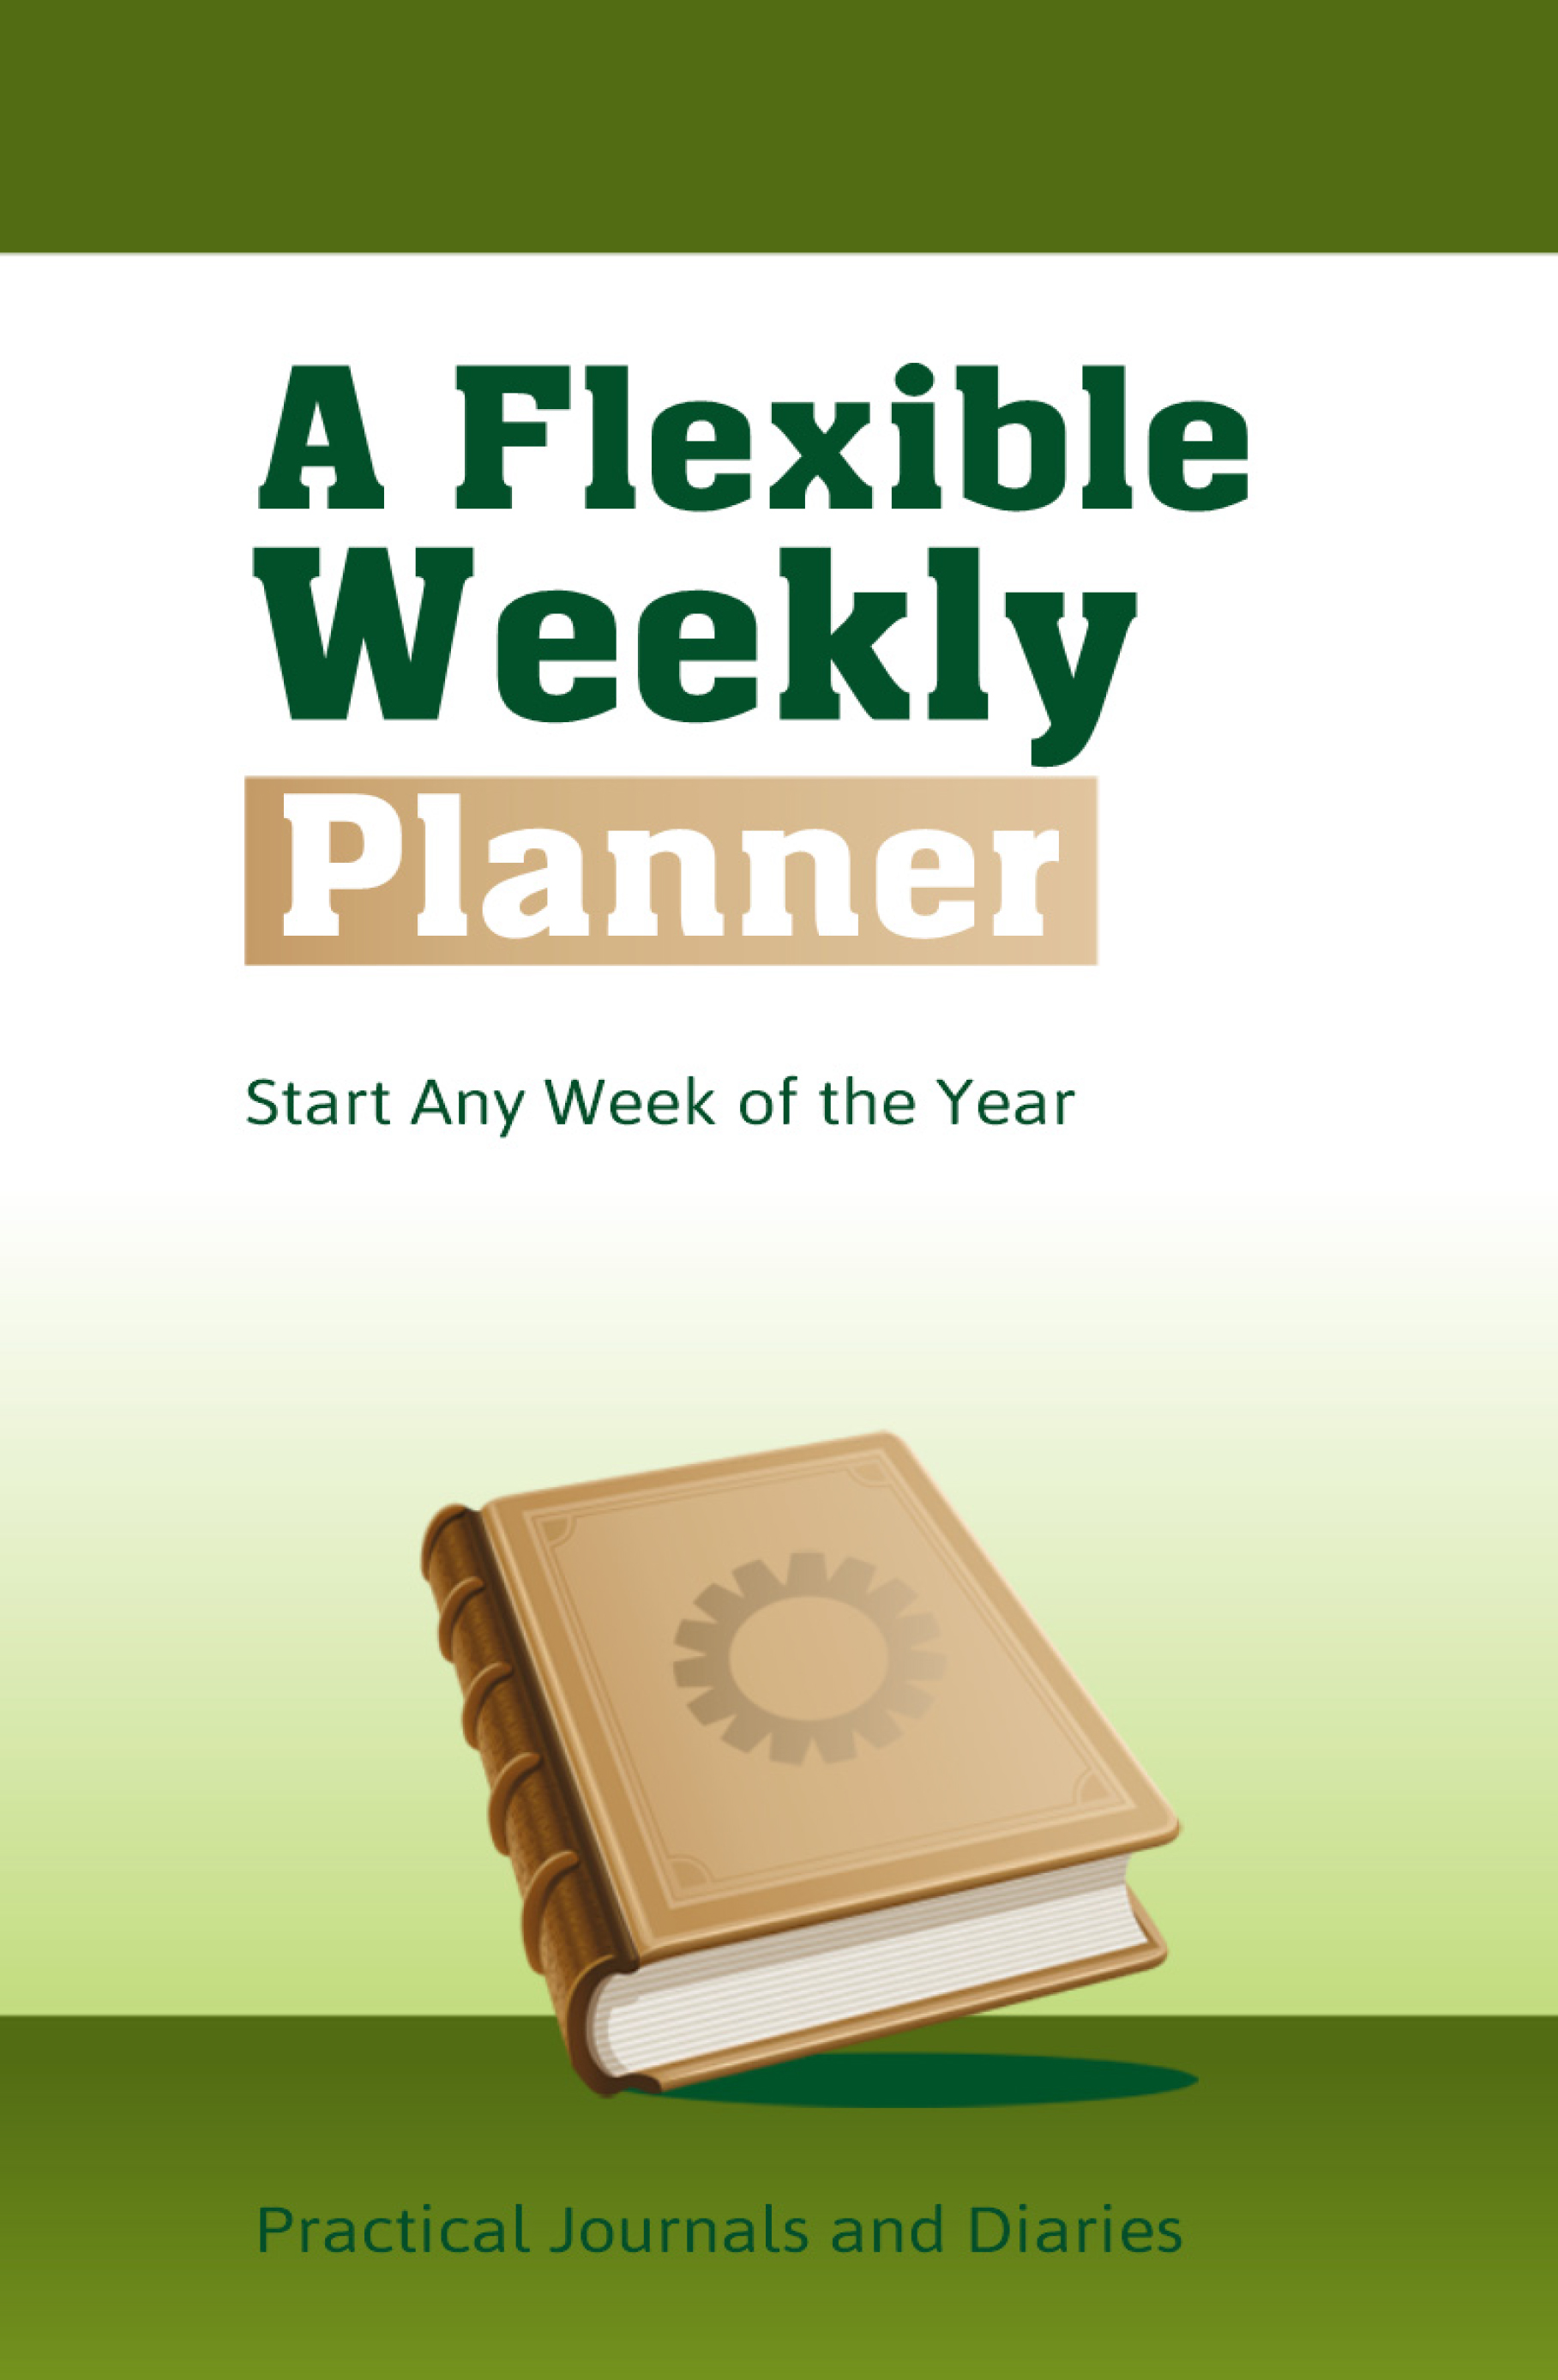 Flexible Weekly Planner cover